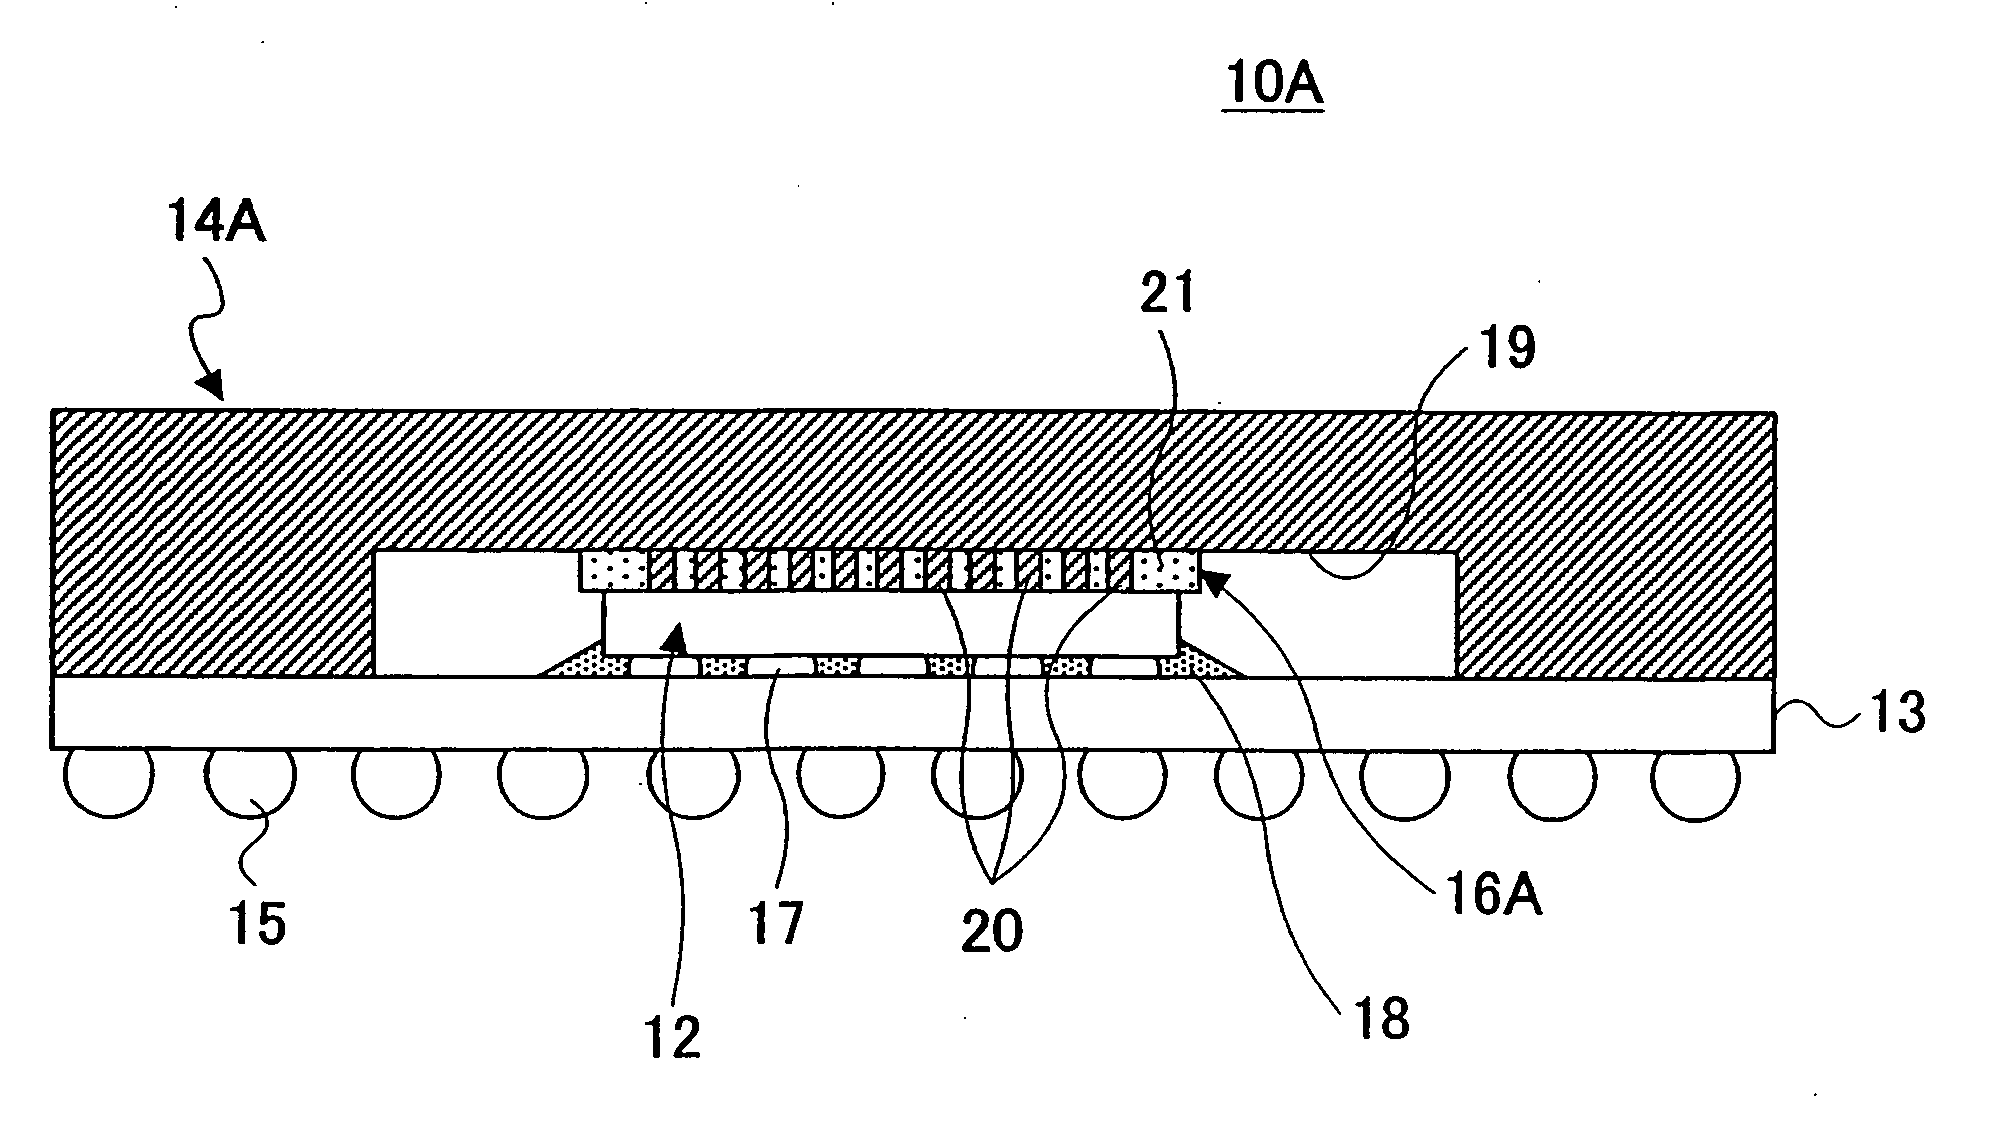 Semiconductor device with improved heat dissipation, and a method of making semiconductor device